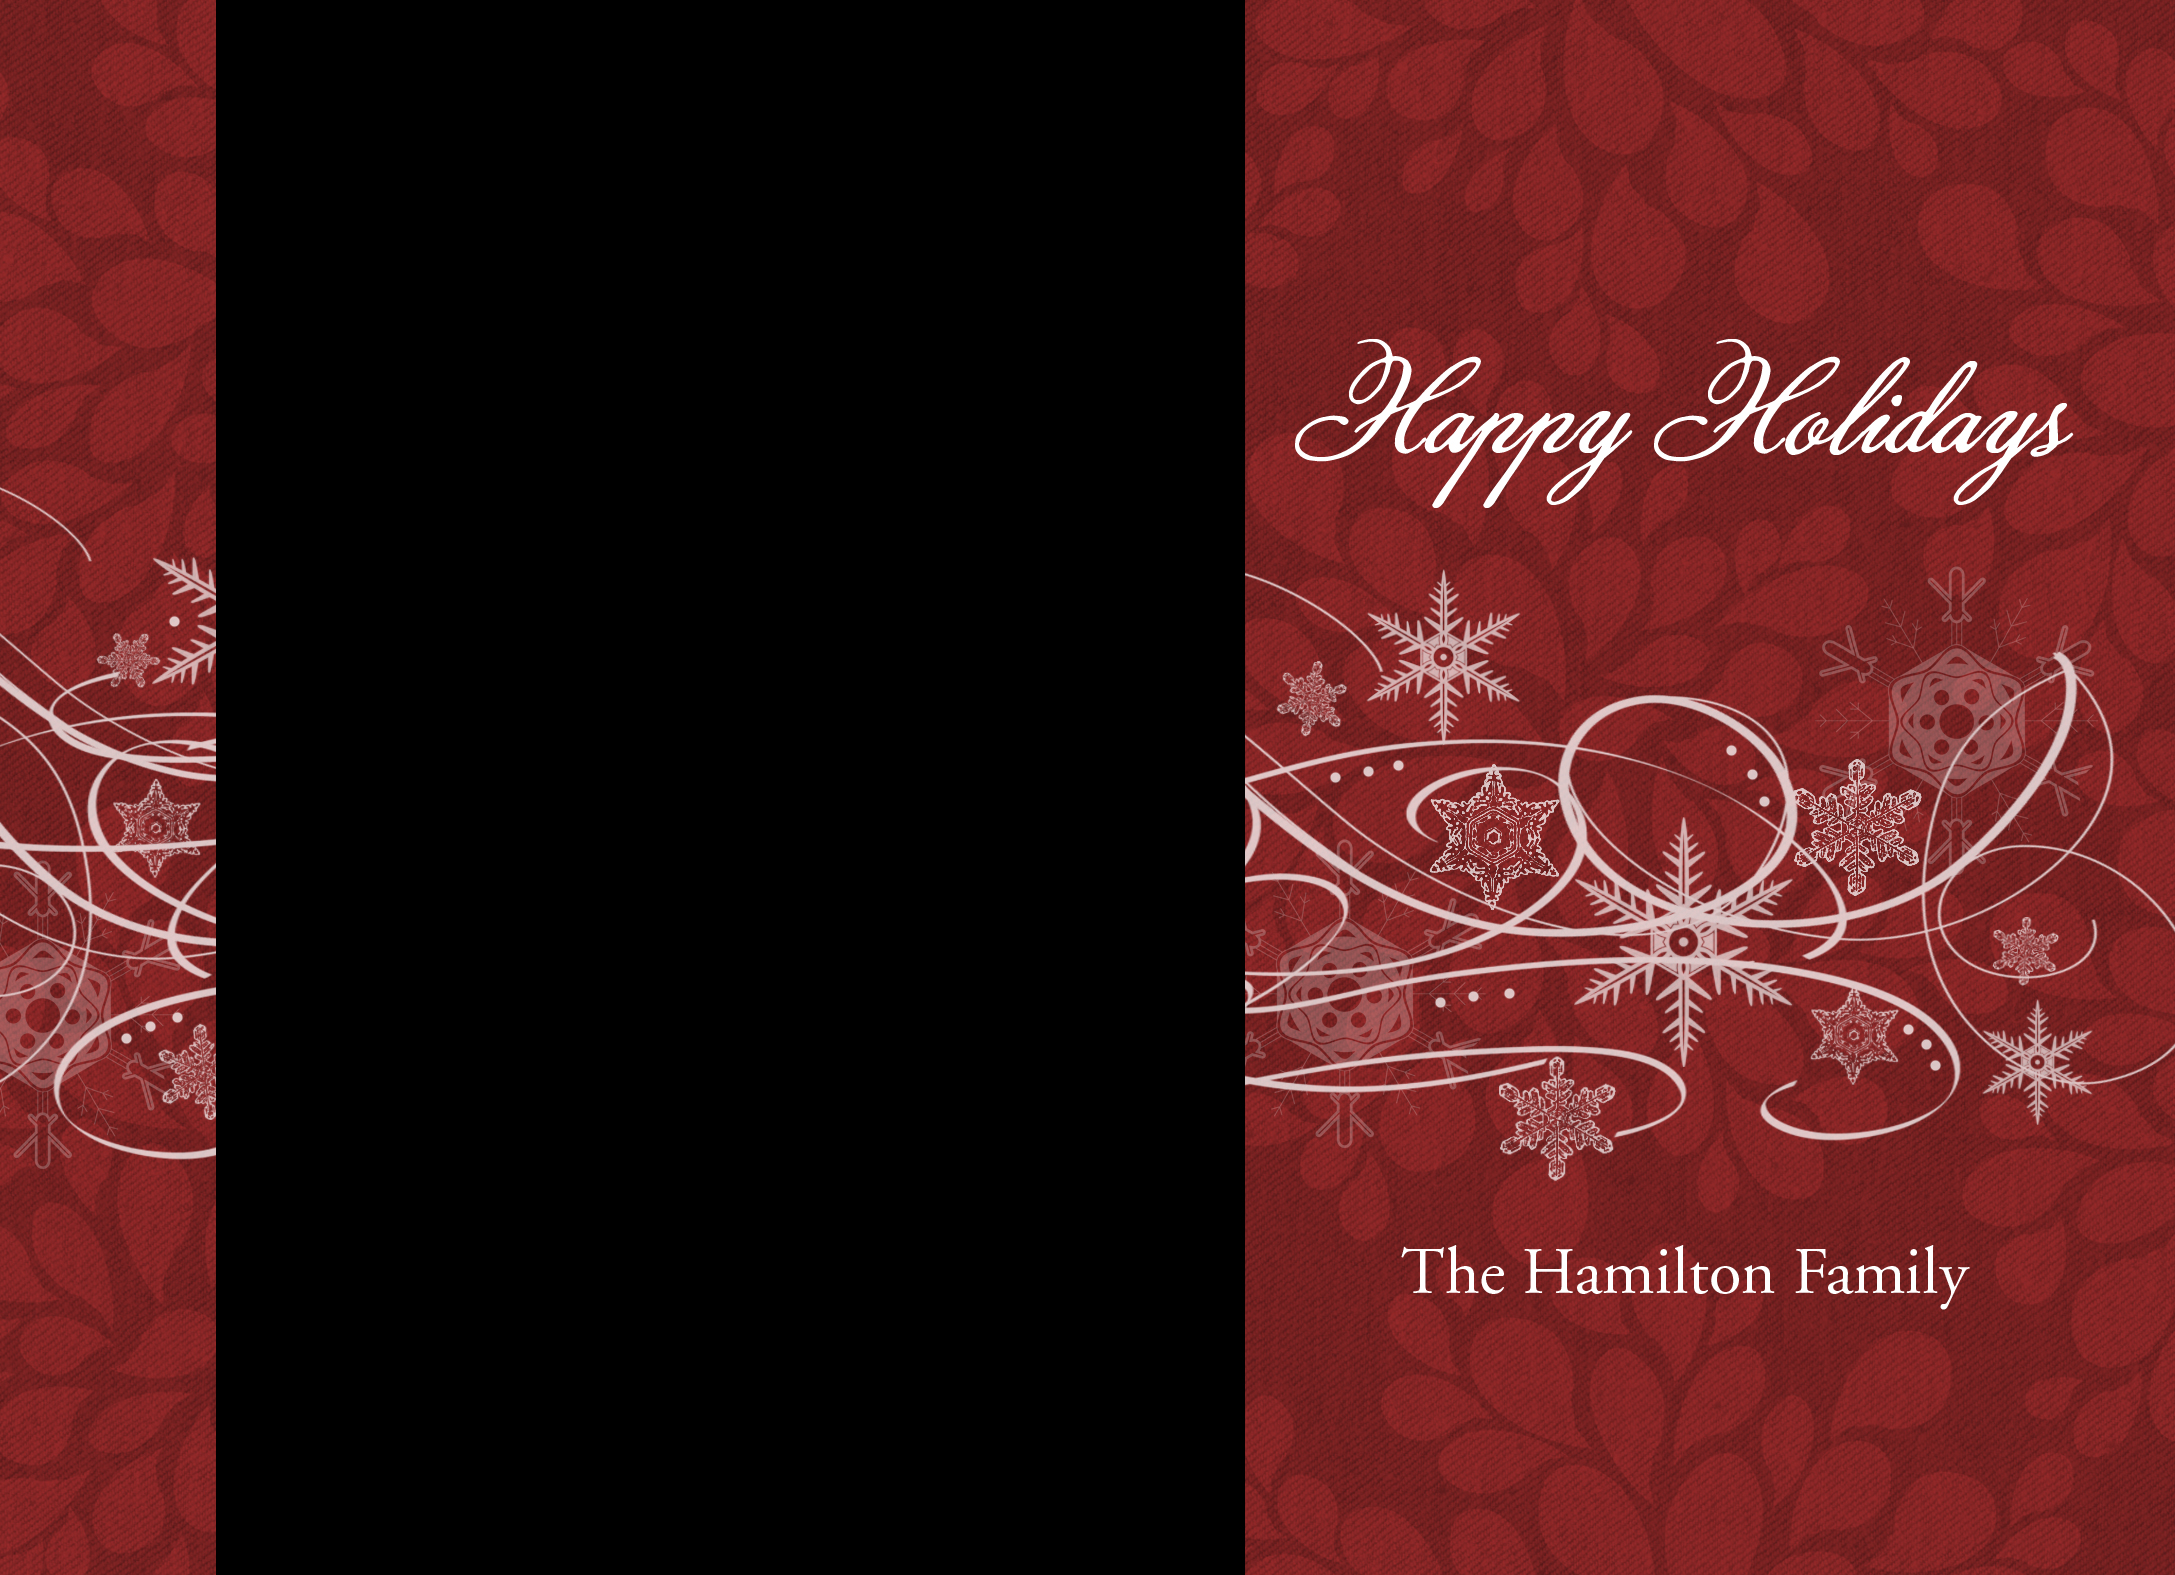 Happy Holiday Greeting cards with envelopes